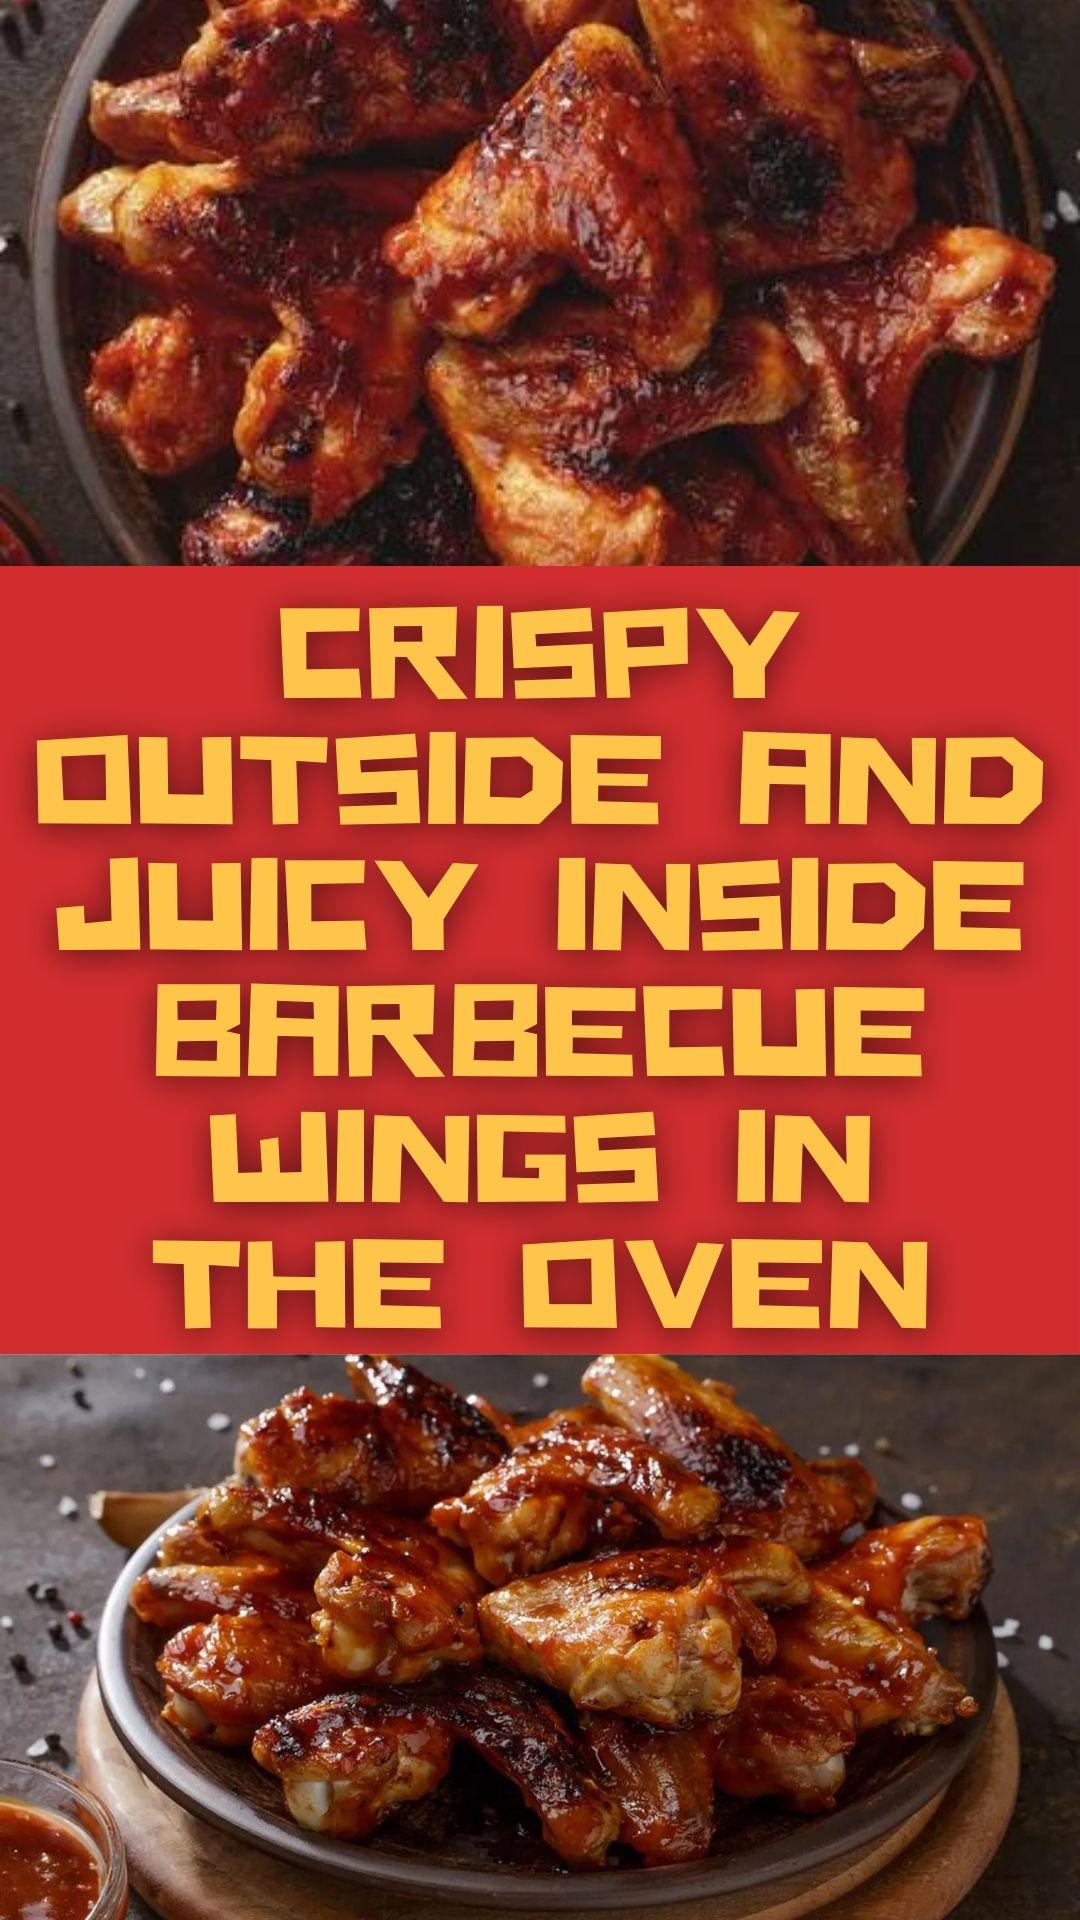 Crispy Outside and Juicy Inside Barbecue Wings in the Oven